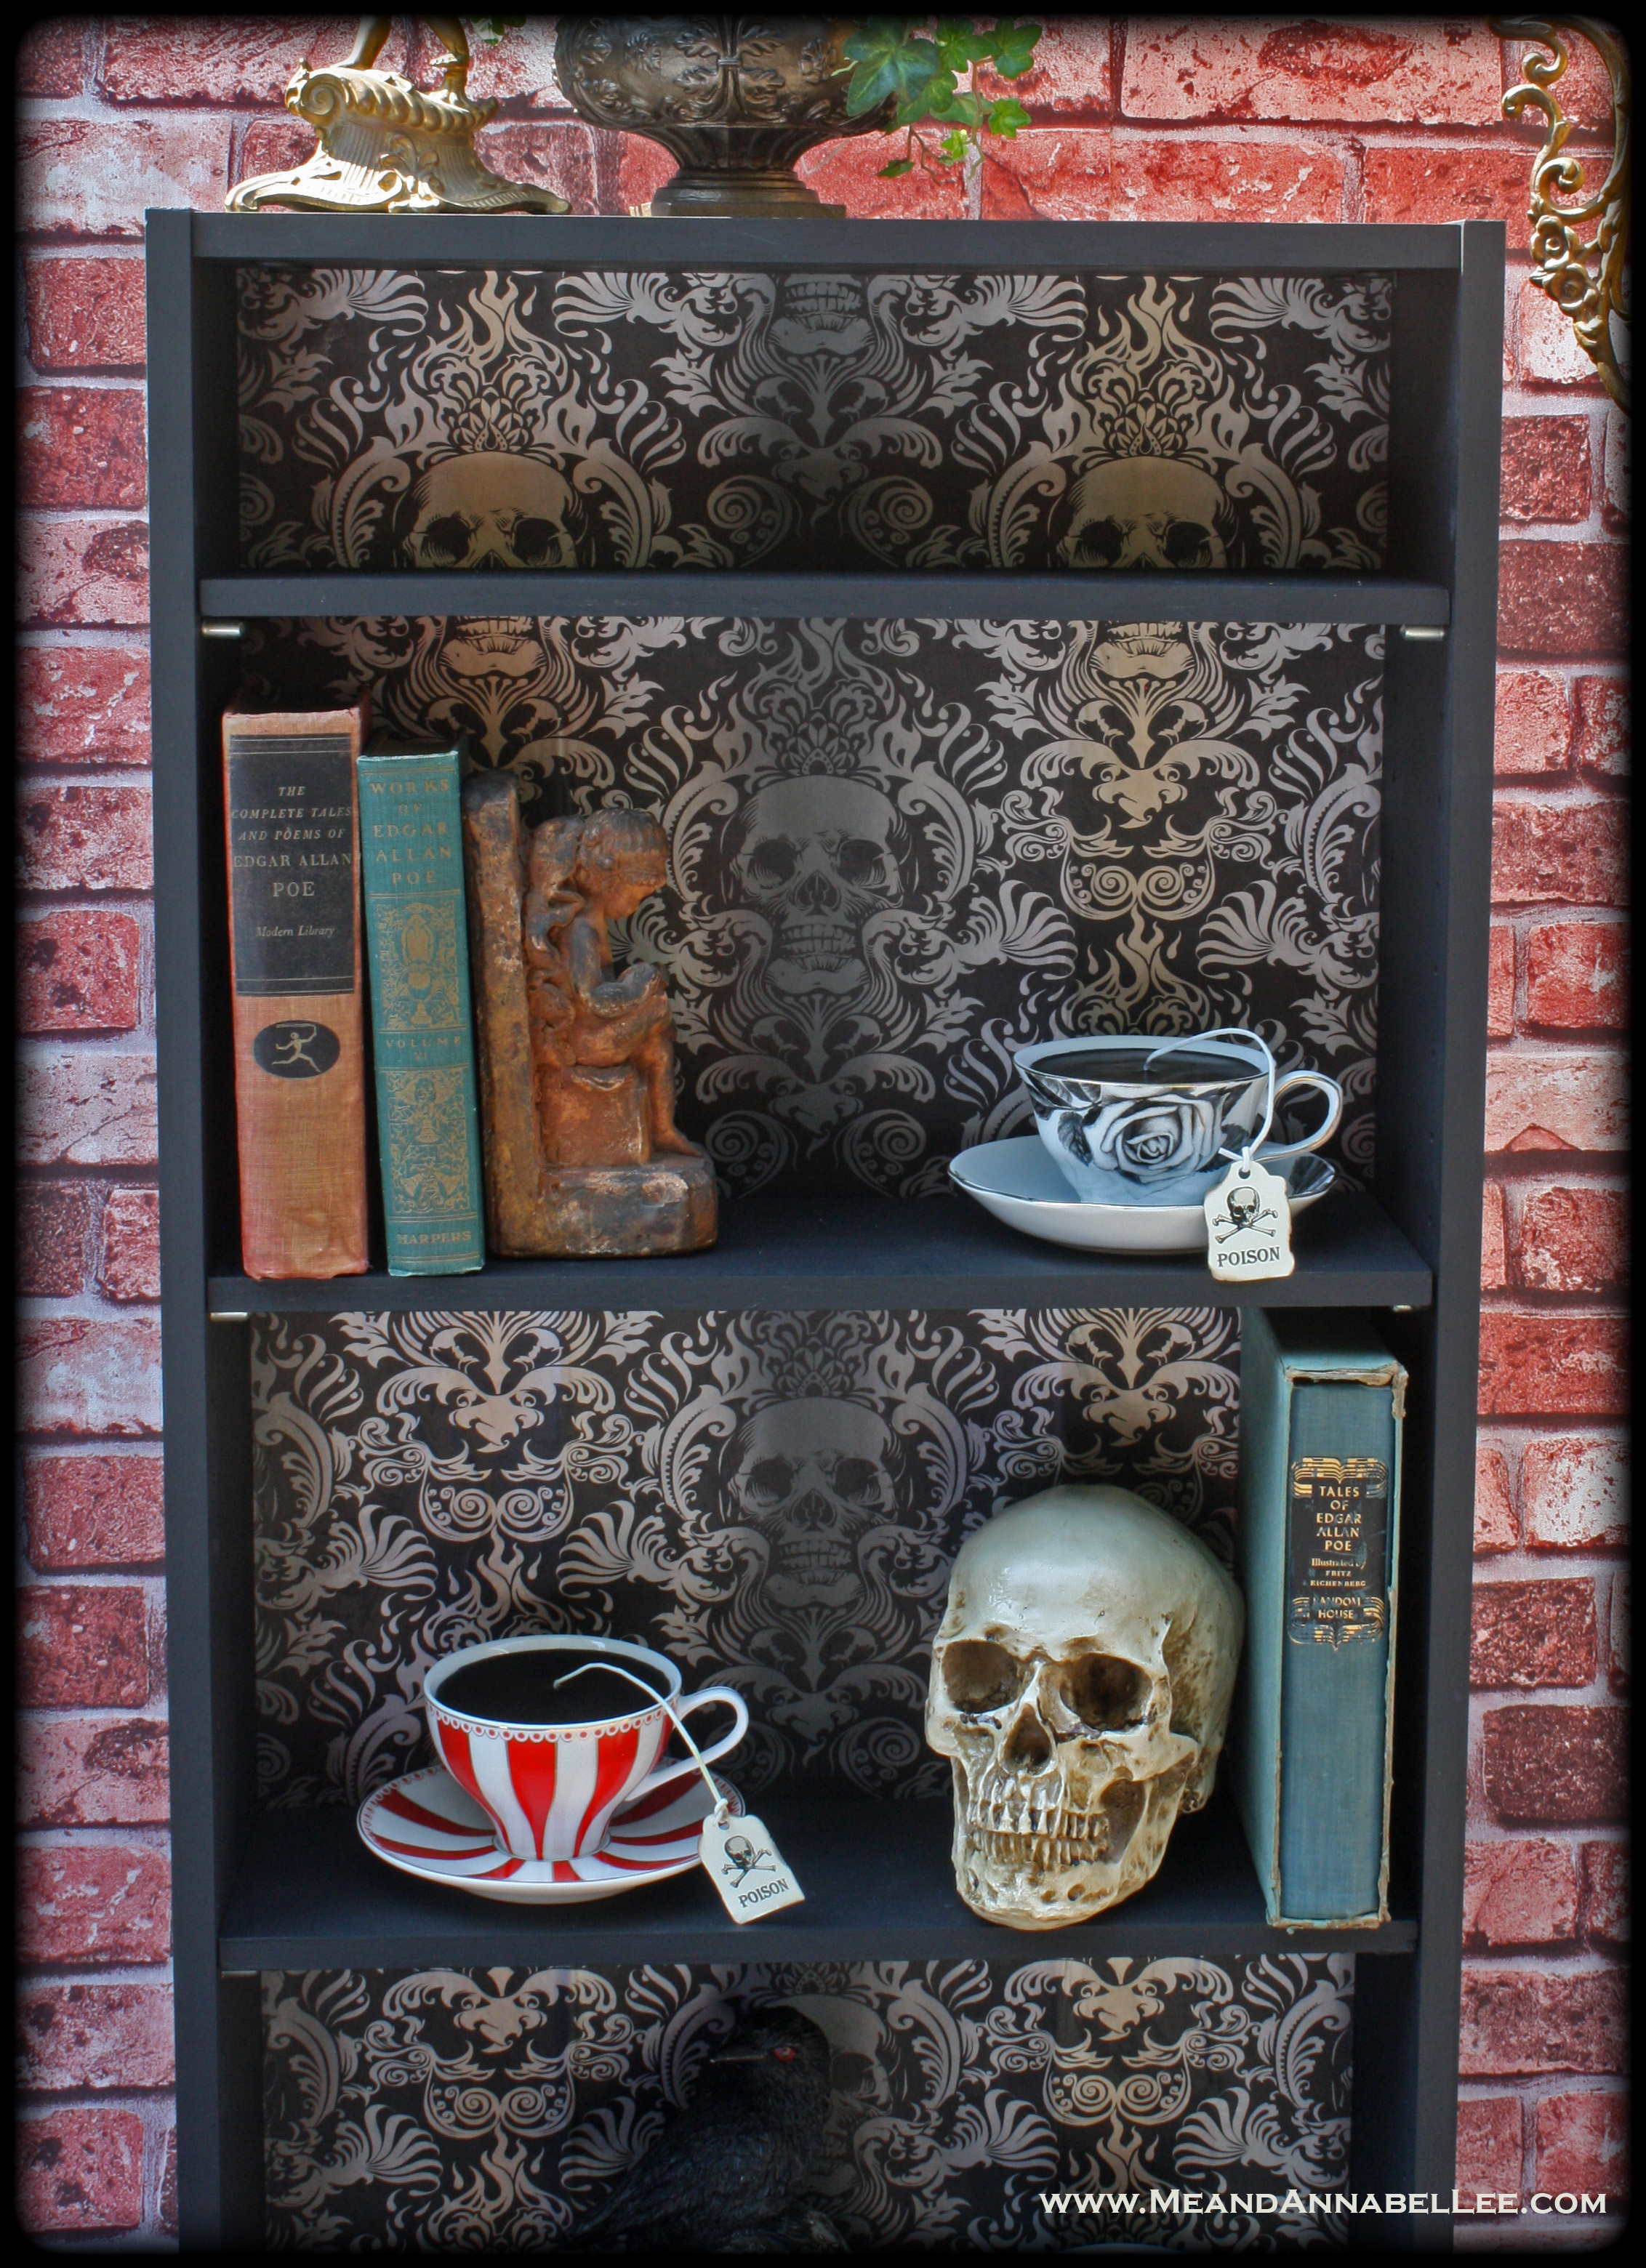 DIY Gothic Skull Bookcase | Black & Gold Baroque Skull Wallpaper | How to Apply to a Book Shelf | Goth Home Decor | www.MeandAnnabelLee.com